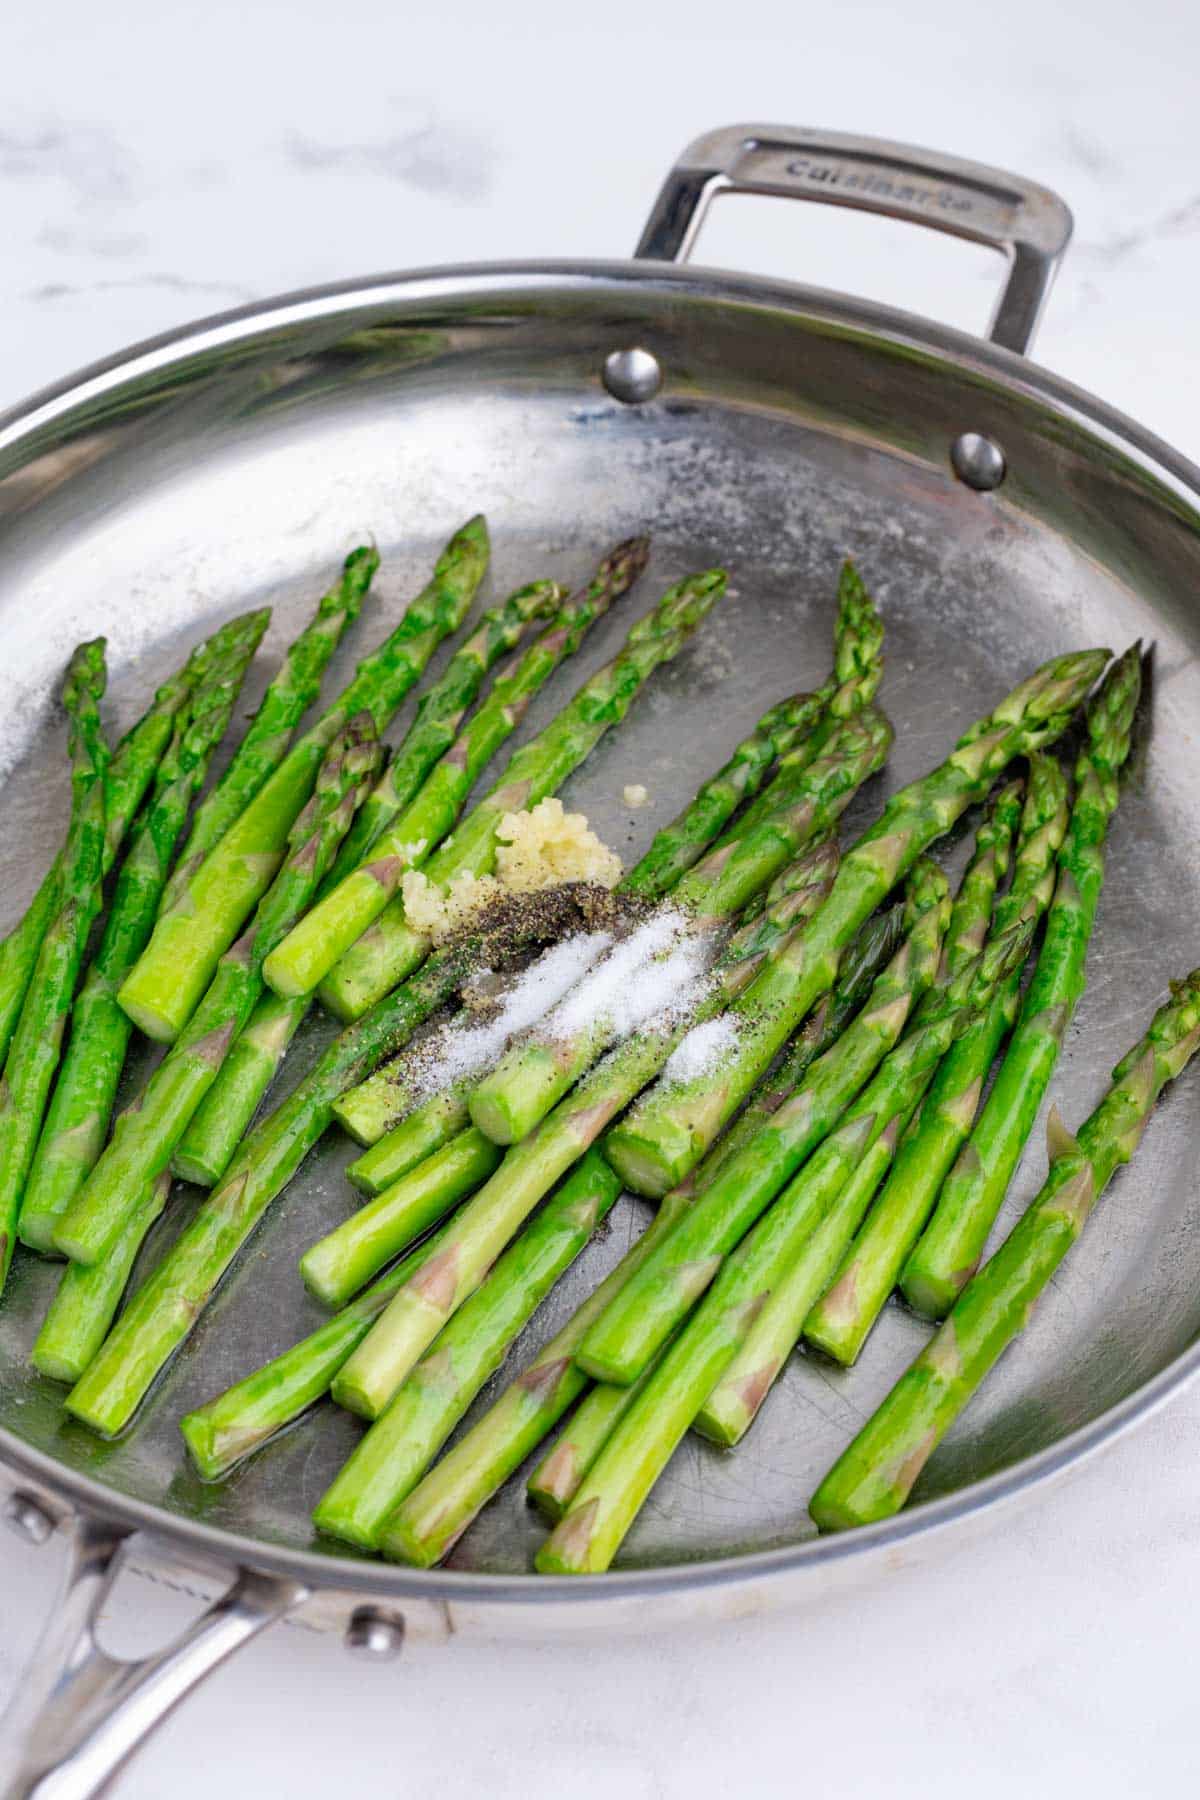 Garlic and seasonings are added to the asparagus.